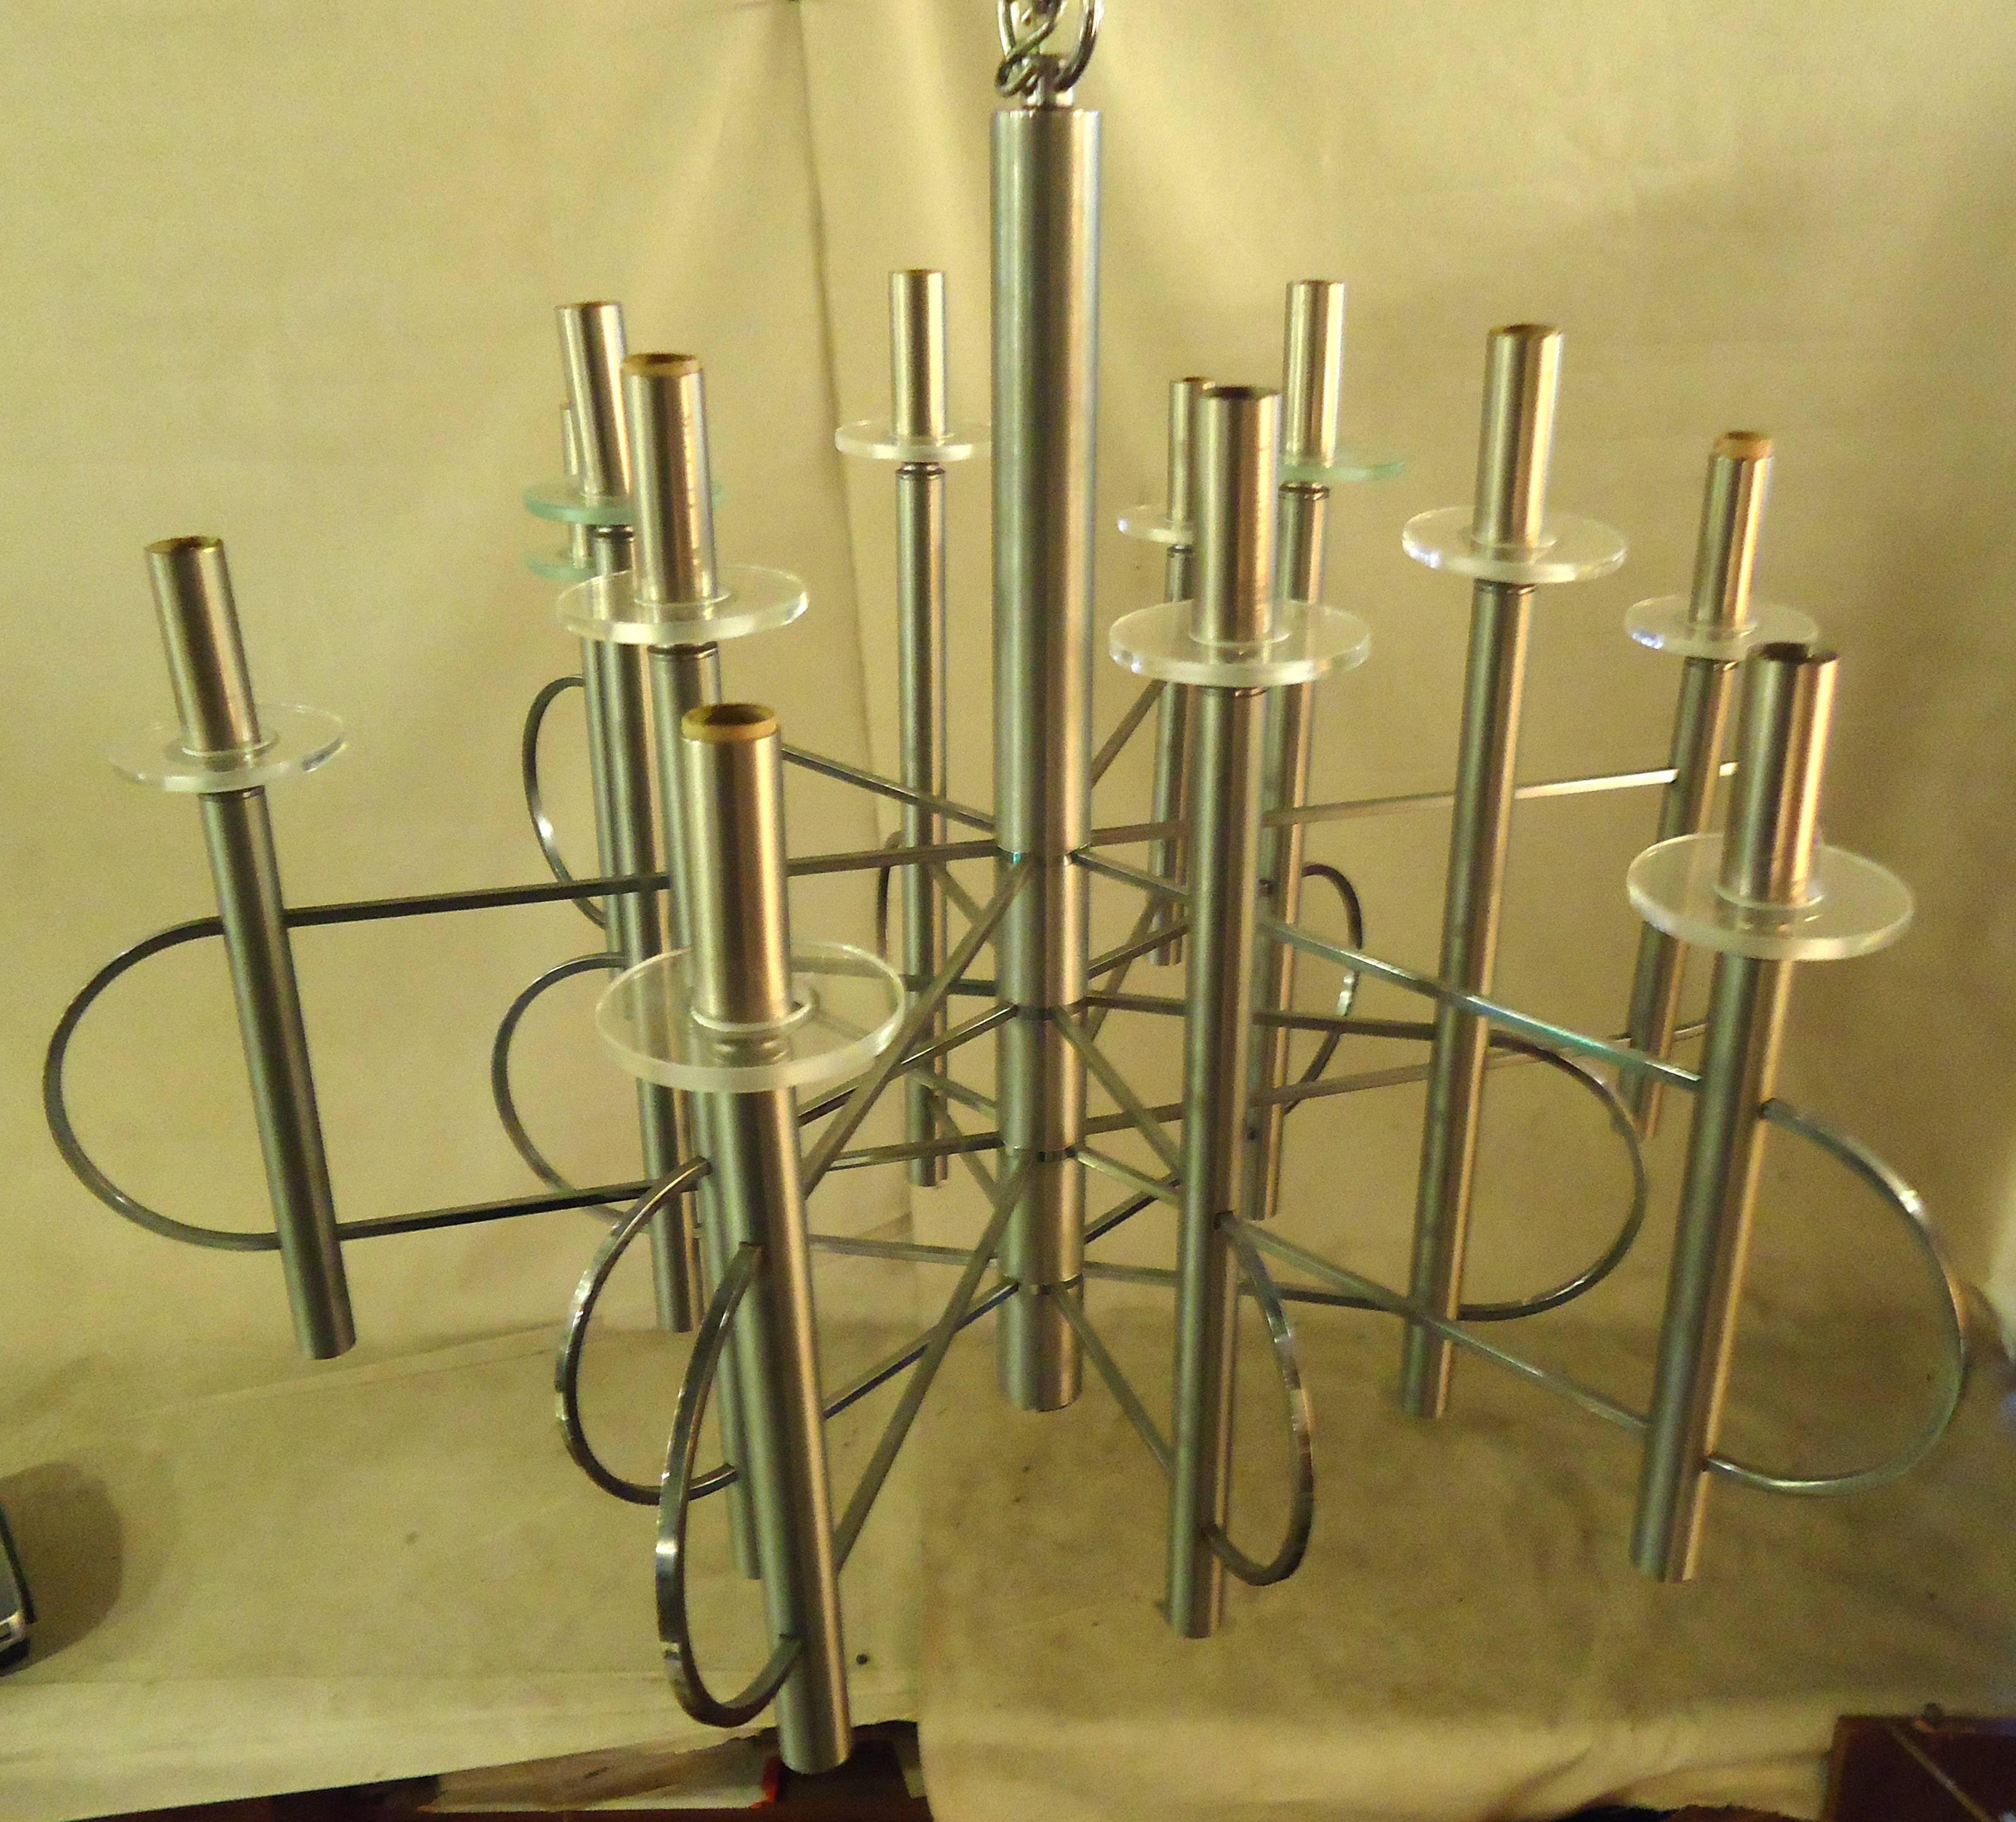 Vintage modern 24 bulb chandelier featuring sculpted chrome frame with glass trim, designed by Gaetano Sciolari. 
Please confirm item location NY or NJ with dealer.